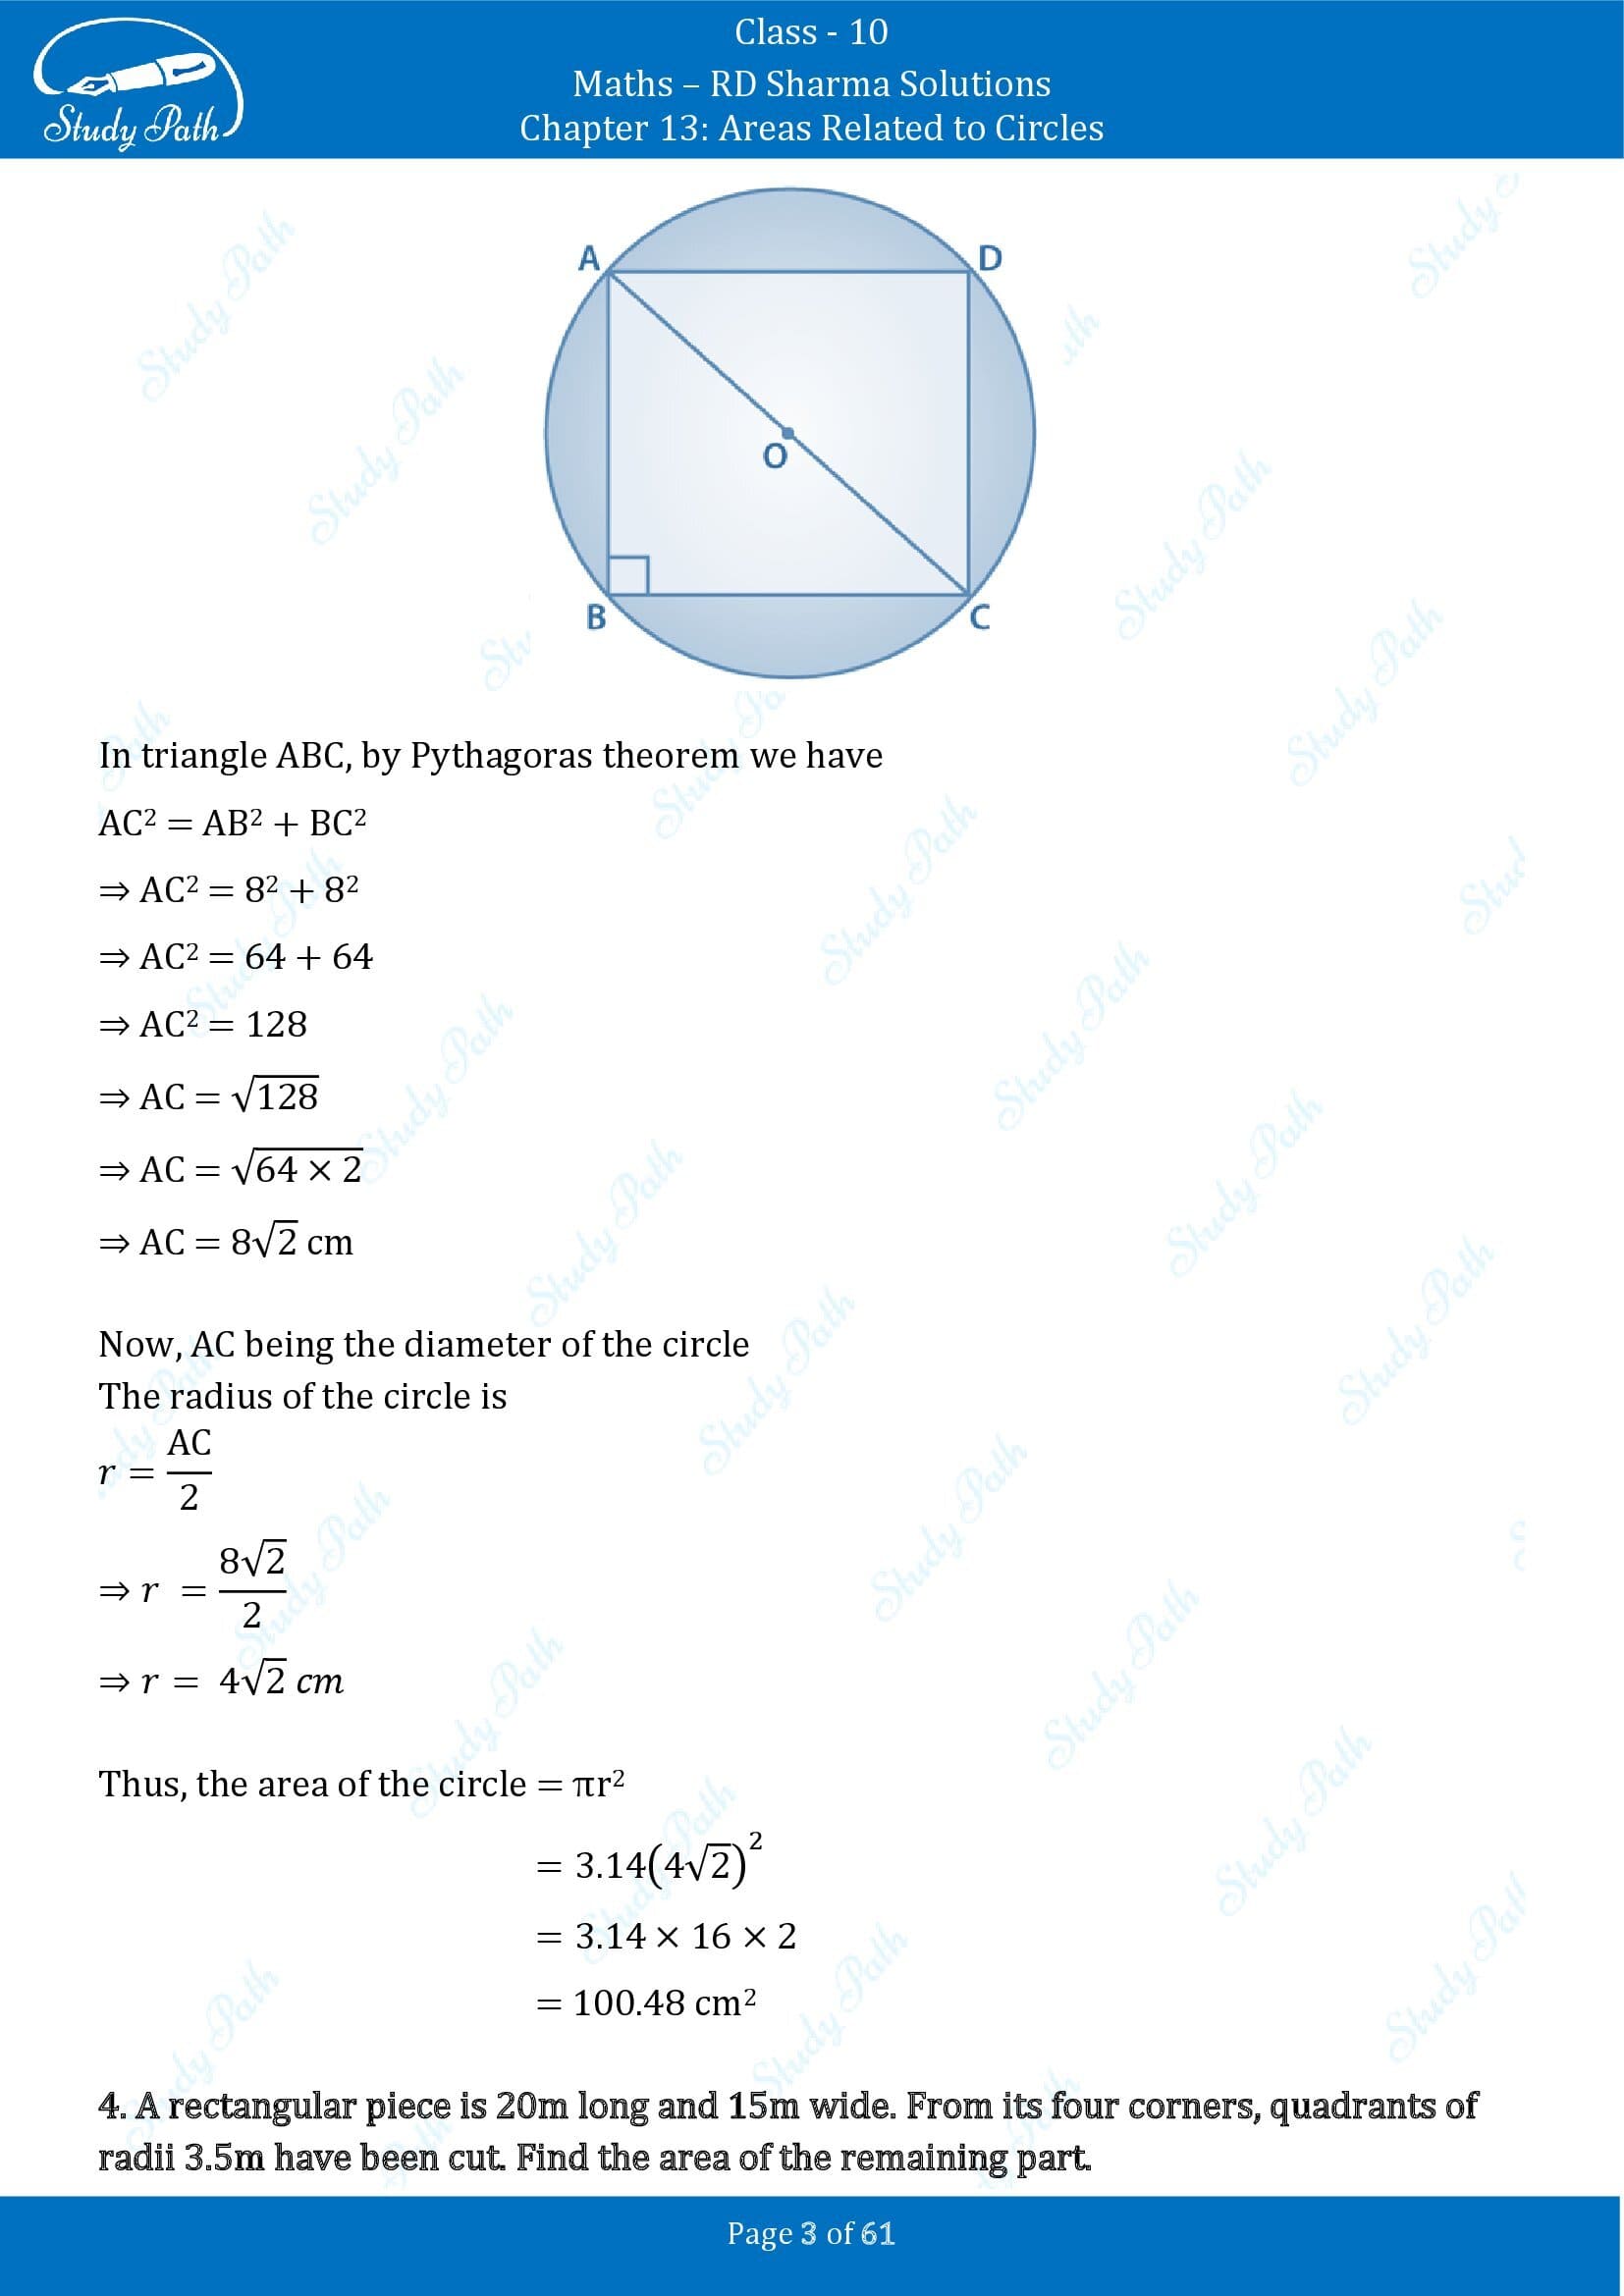 RD Sharma Solutions Class 10 Chapter 13 Areas Related to Circles Exercise 13.4 00003